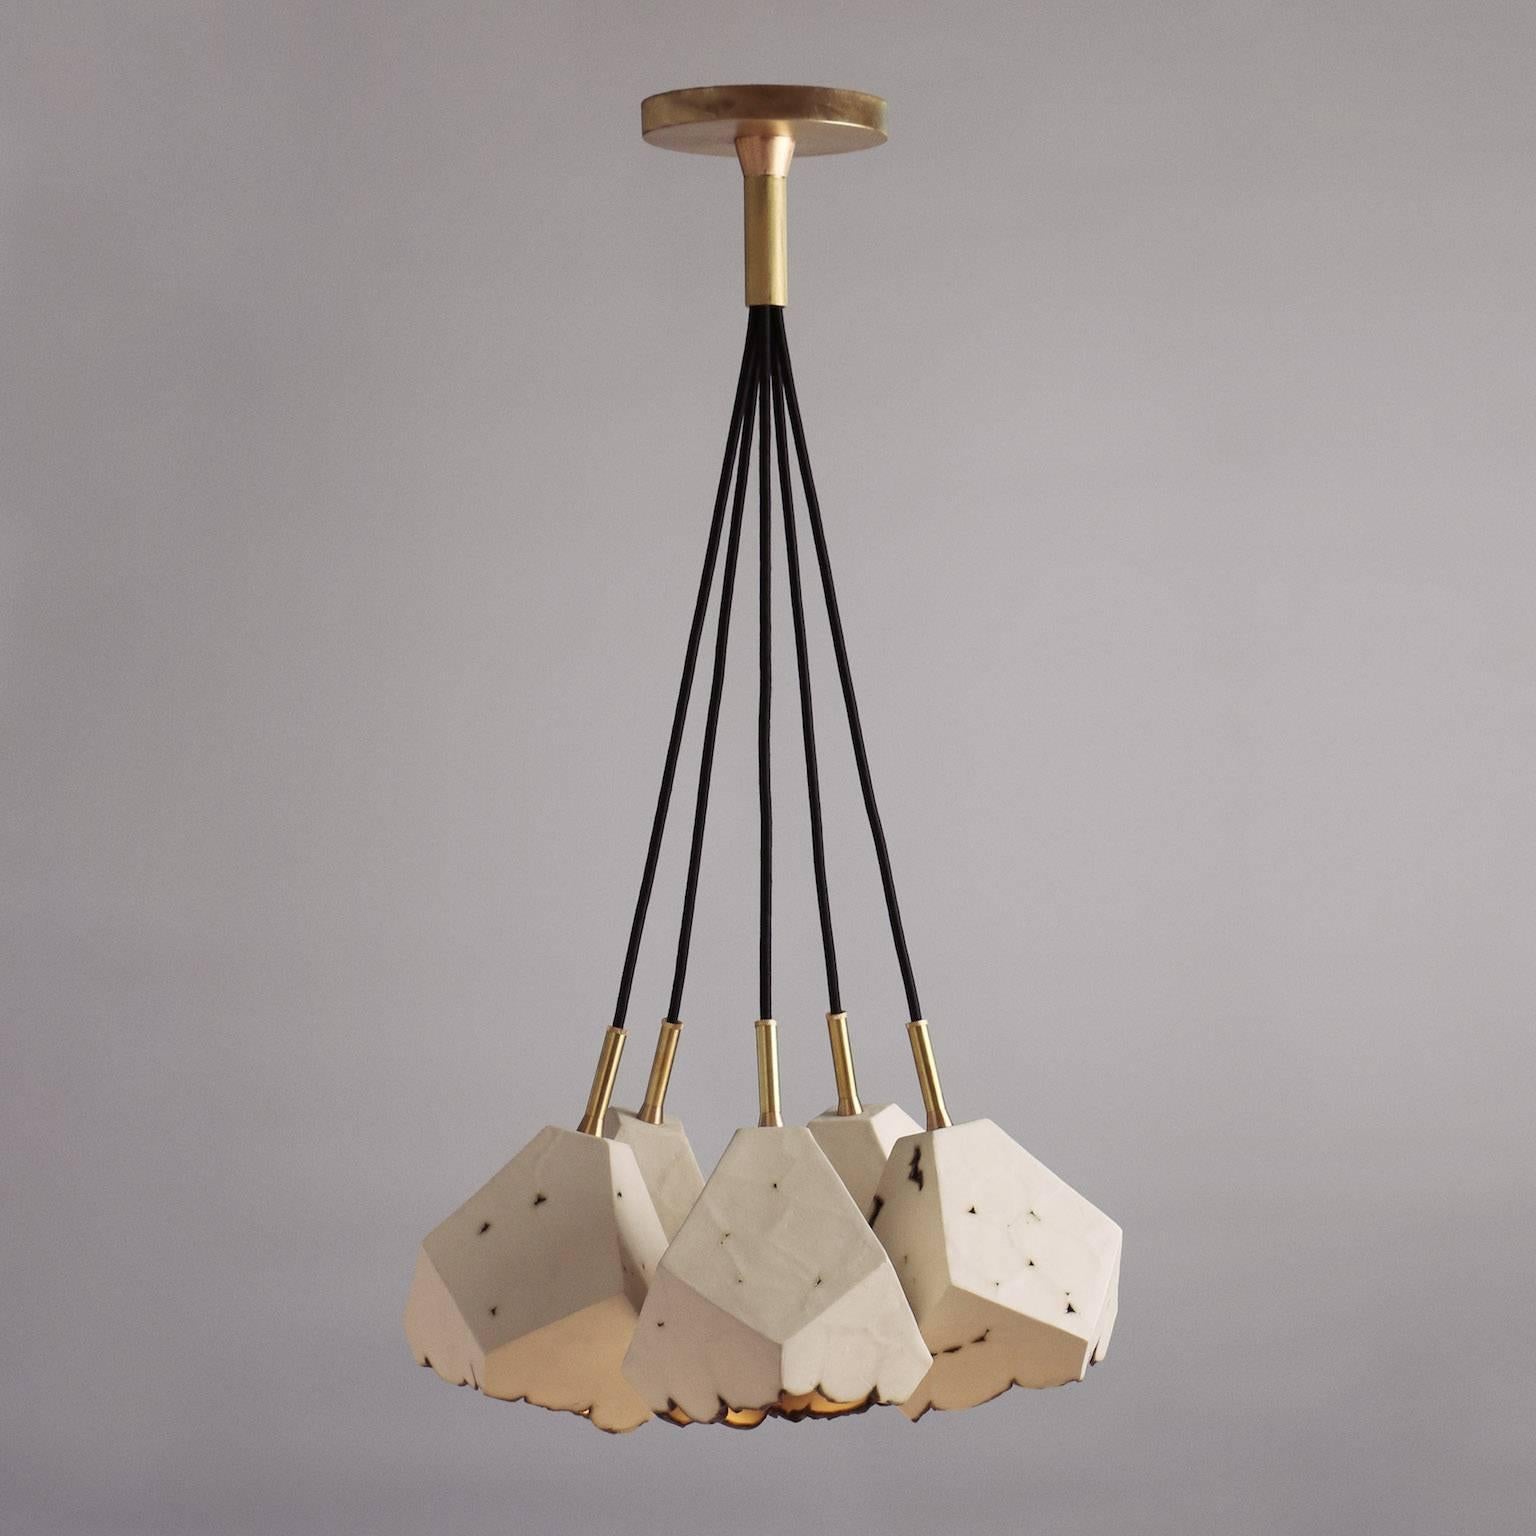 This sculptural chandelier features five geometric porcelain pendants with a unique textural matte finish, and custom brass hardware. The shades are each handcrafted from slabs of unglazed white porcelain with highly individual black oxide burnout